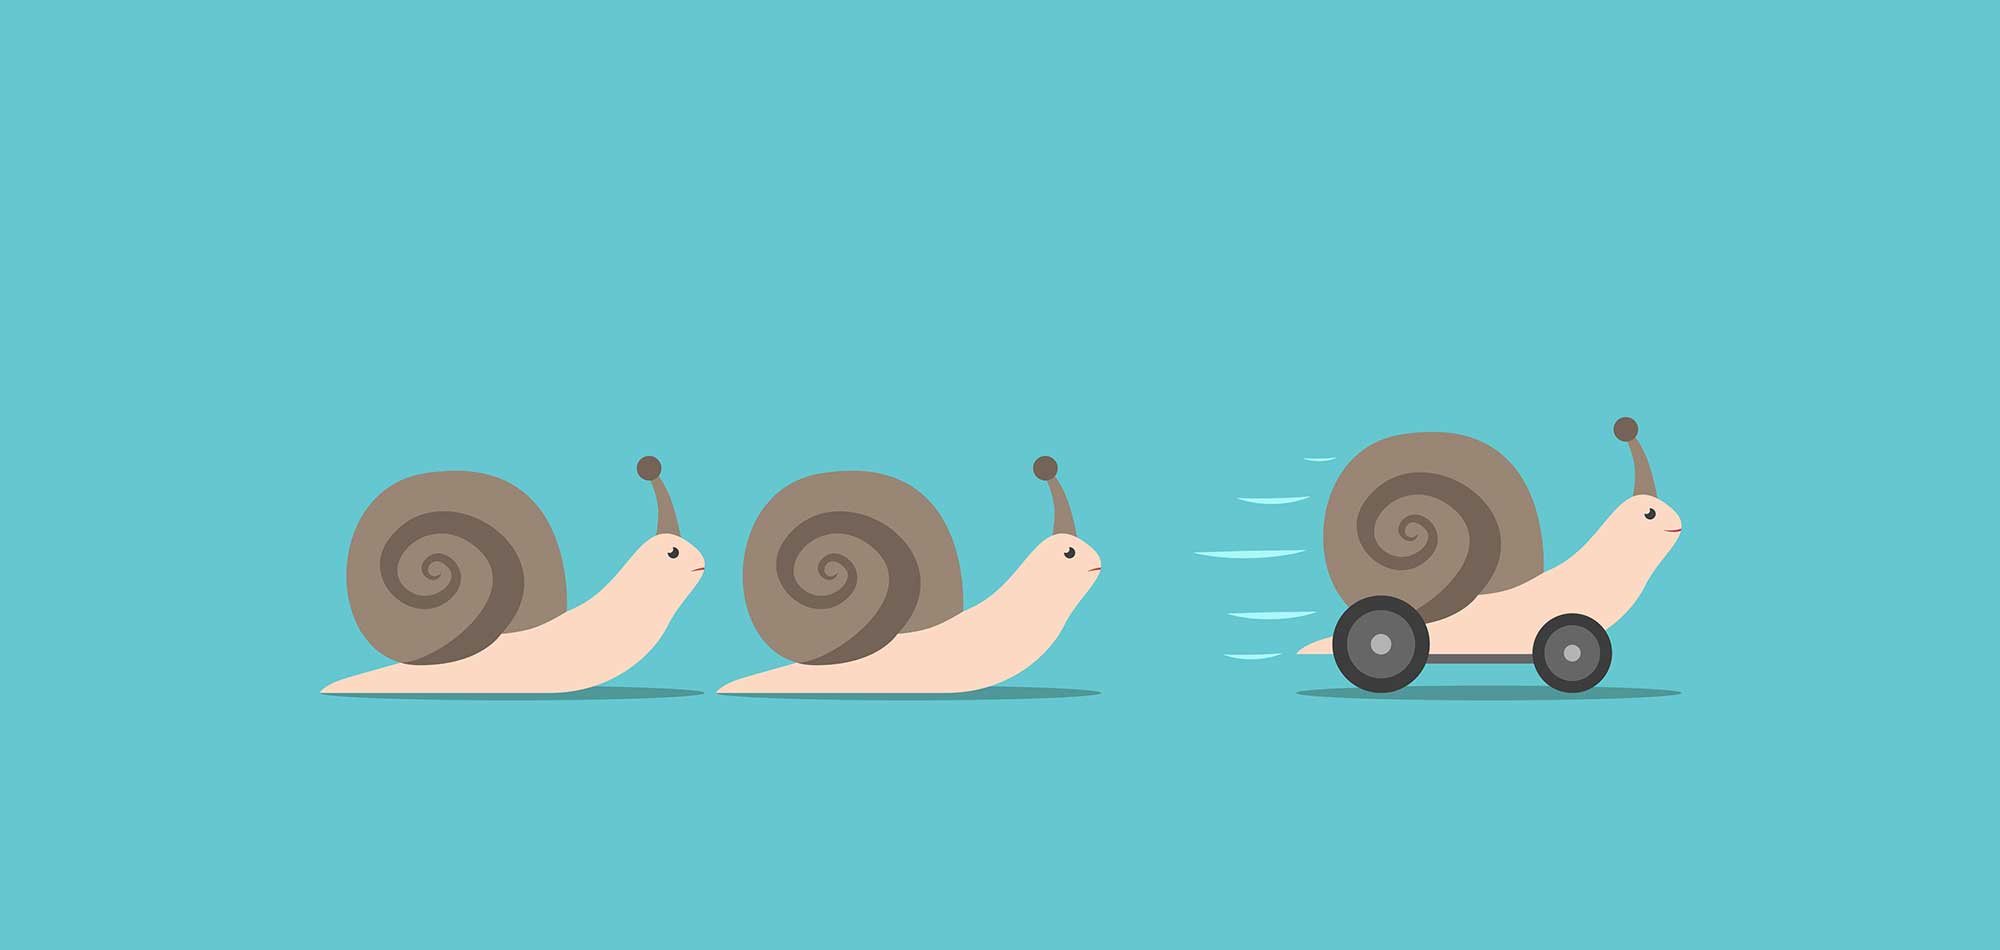 Line of snails but the one in the lead is driving on wheels